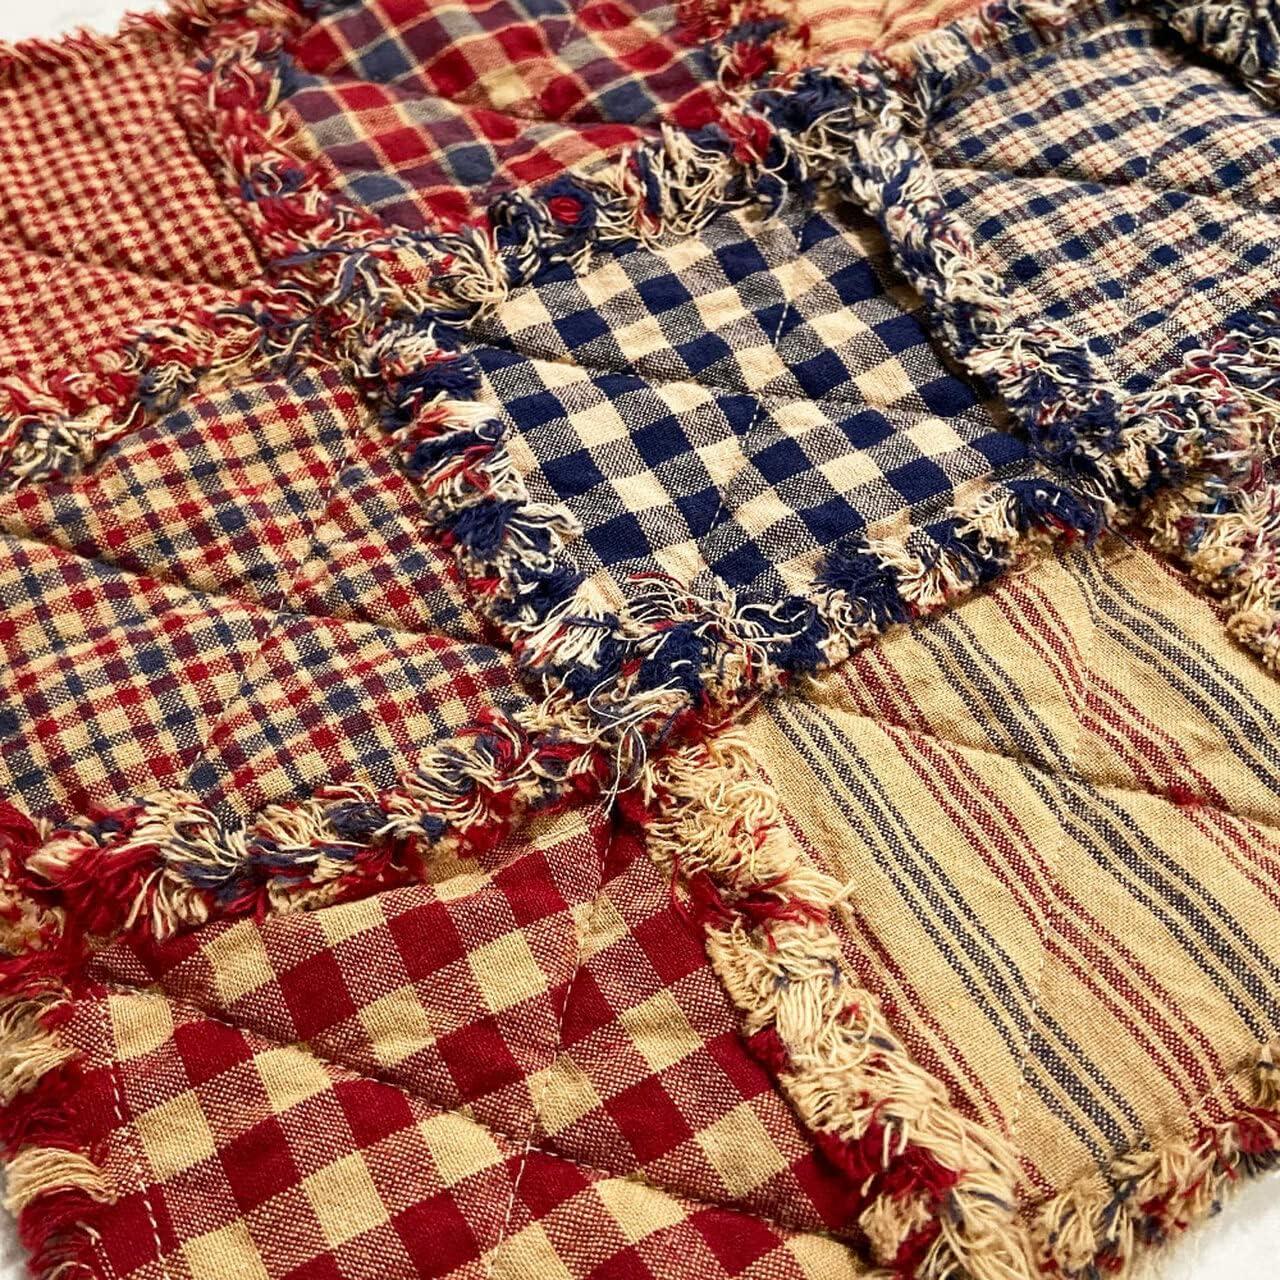 40+ American Heritage Charm Pack Red Blue 6 inch Precut Cotton Homespun  Fabric Squares by JCS 6 inch Squares